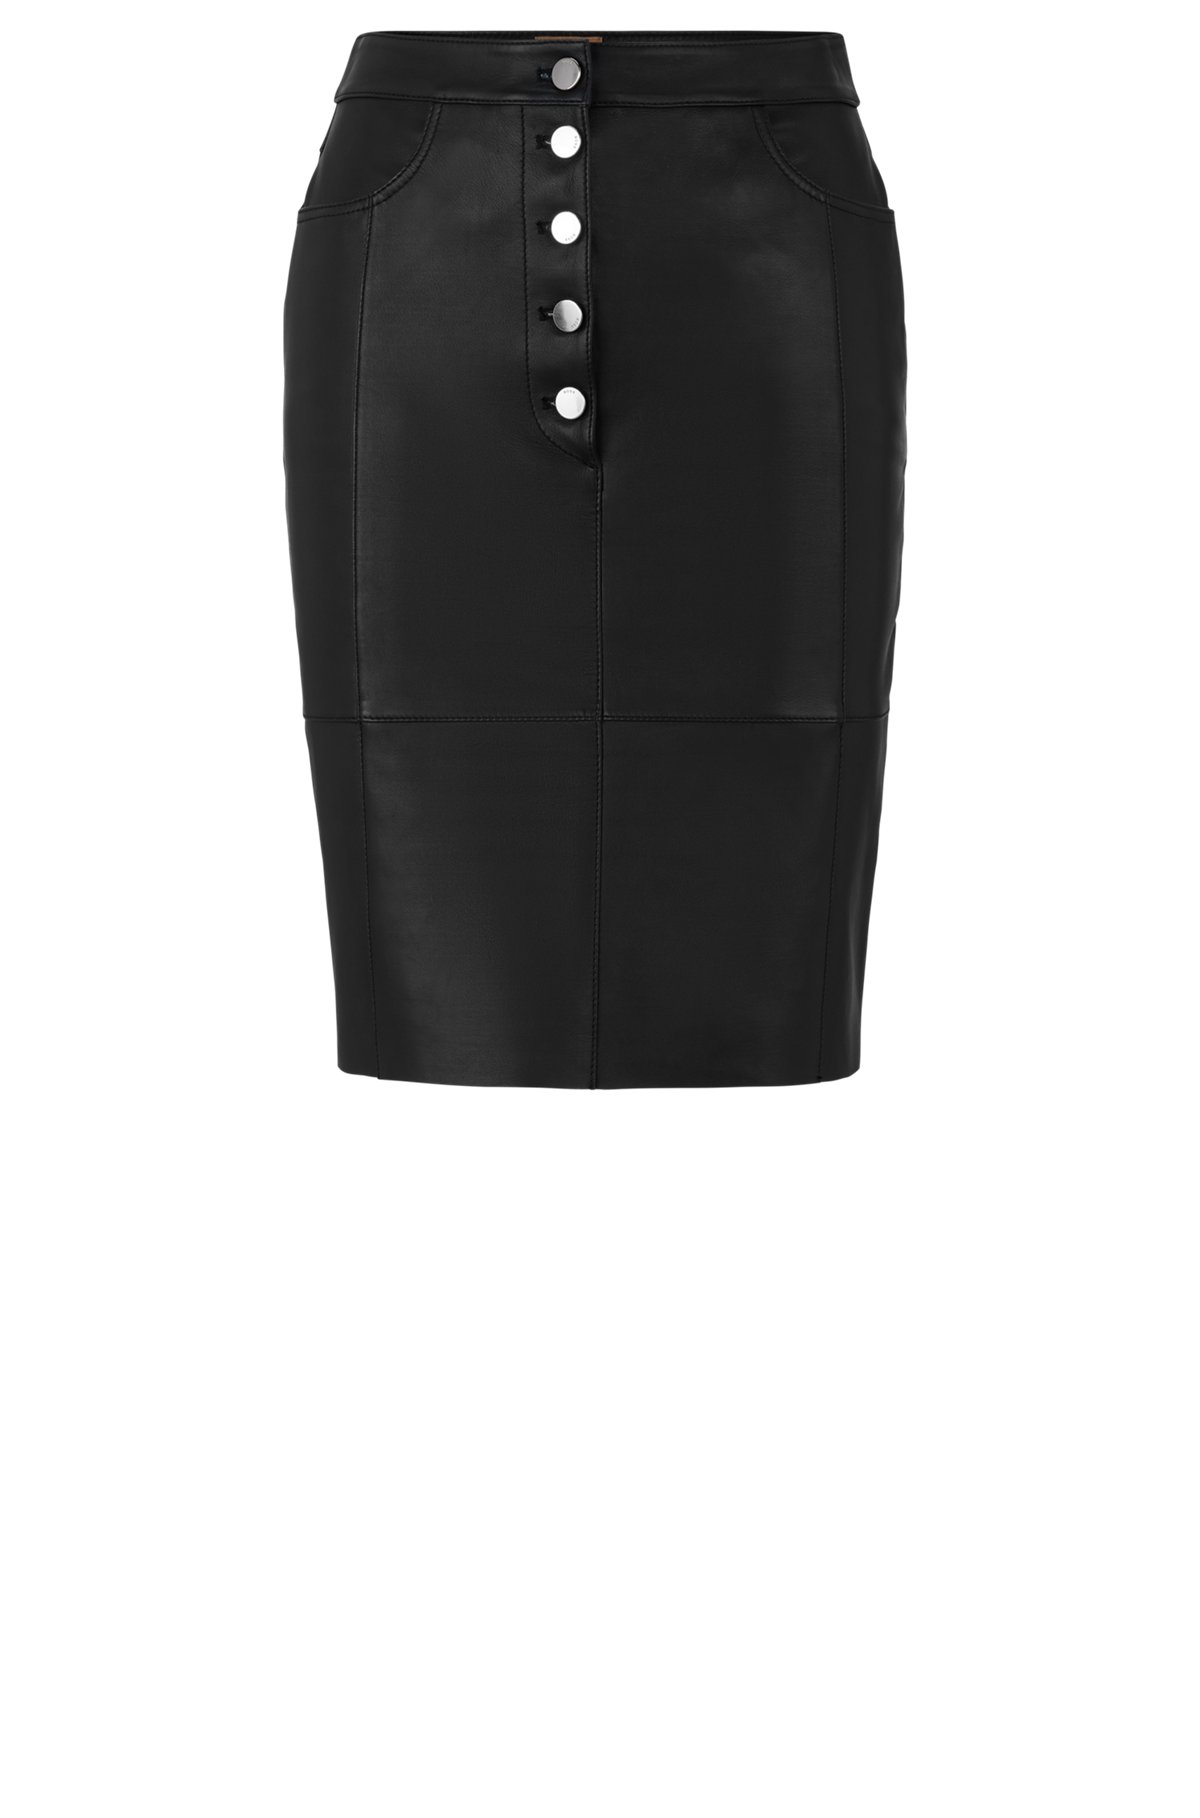 BOSS - Lamb-leather pencil skirt bonded with denim